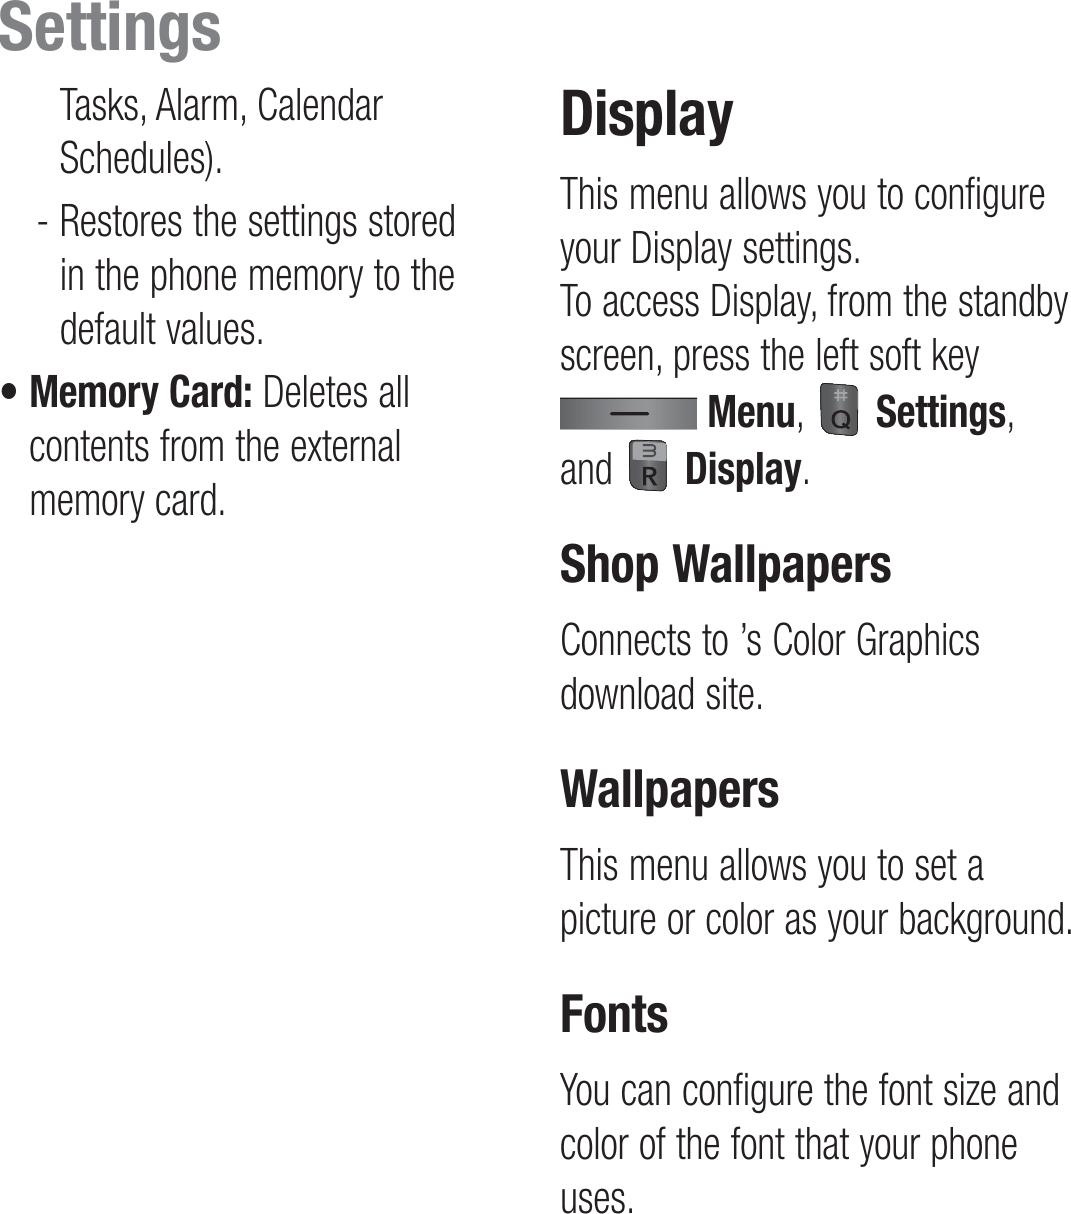 Tasks, Alarm, Calendar Schedules).  -  Restores the settings stored in the phone memory to the default values.•  Memory Card: Deletes all contents from the external memory card.DisplayThis menu allows you to configure your Display settings.  To access Display, from the standby screen, press the left soft key  Menu,   Settings, and   Display.Shop WallpapersConnects to ’s Color Graphics download site.WallpapersThis menu allows you to set a picture or color as your background.FontsYou can configure the font size and color of the font that your phone uses.Settings